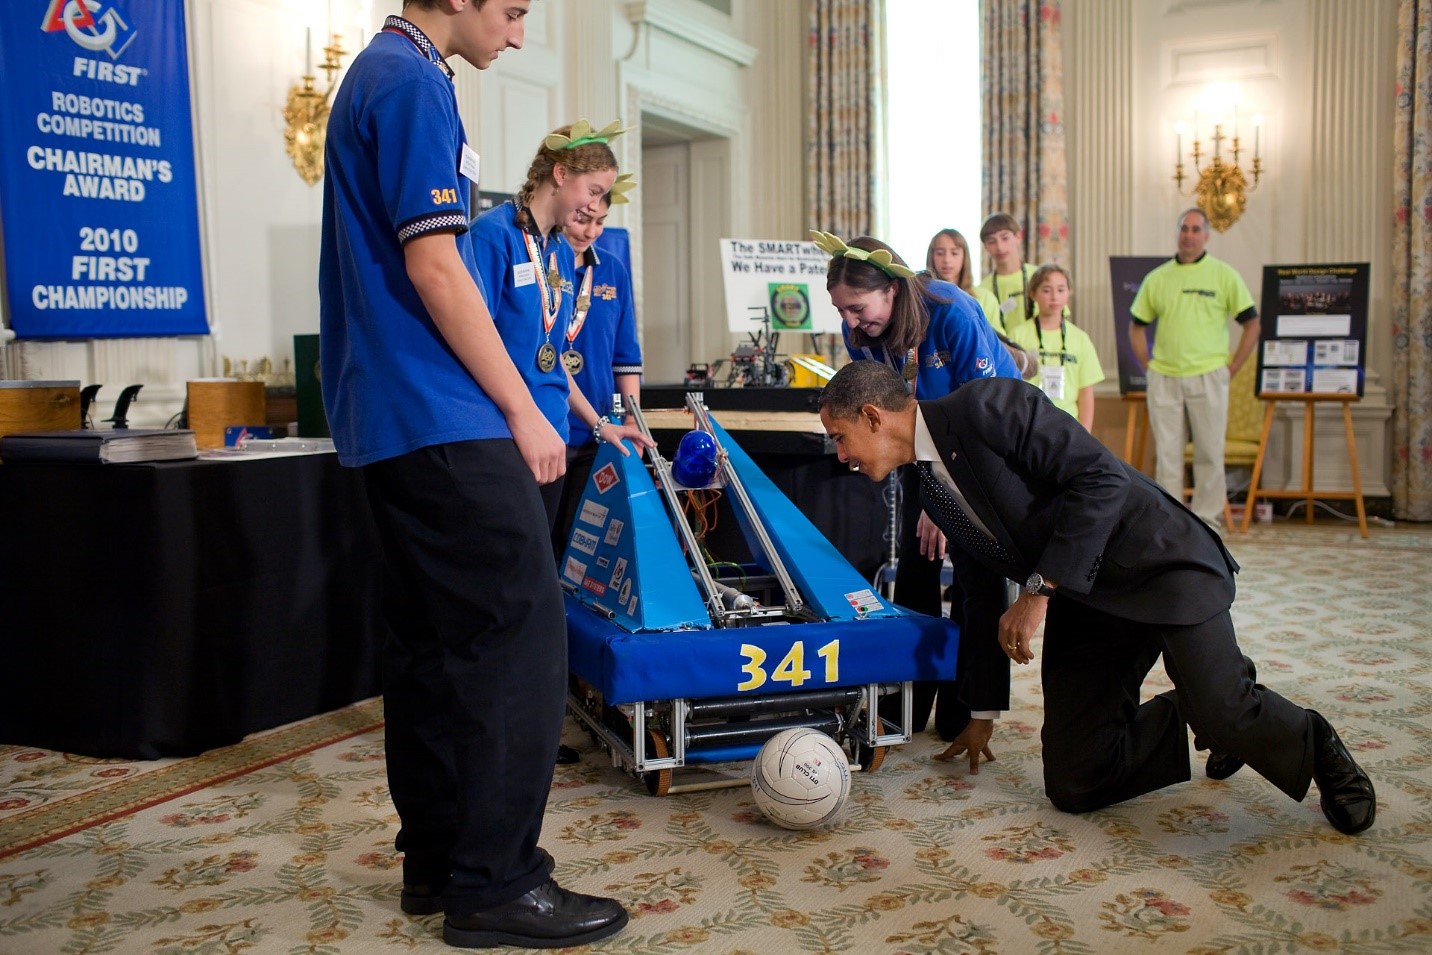 President Barack Obama gets down on his hands and knees as he looks at the inner workings of a robot that plays soccer, built by a team from Blue Bell, Pa., as he tours science projects on display in the State Dining Room of the White House. President Obama hosted the White House Science Fair for winners of a broad range of science, technology, engineering and math (STEM) competitions. October 18, 2010. (Official White House Photo by Pete Souza)